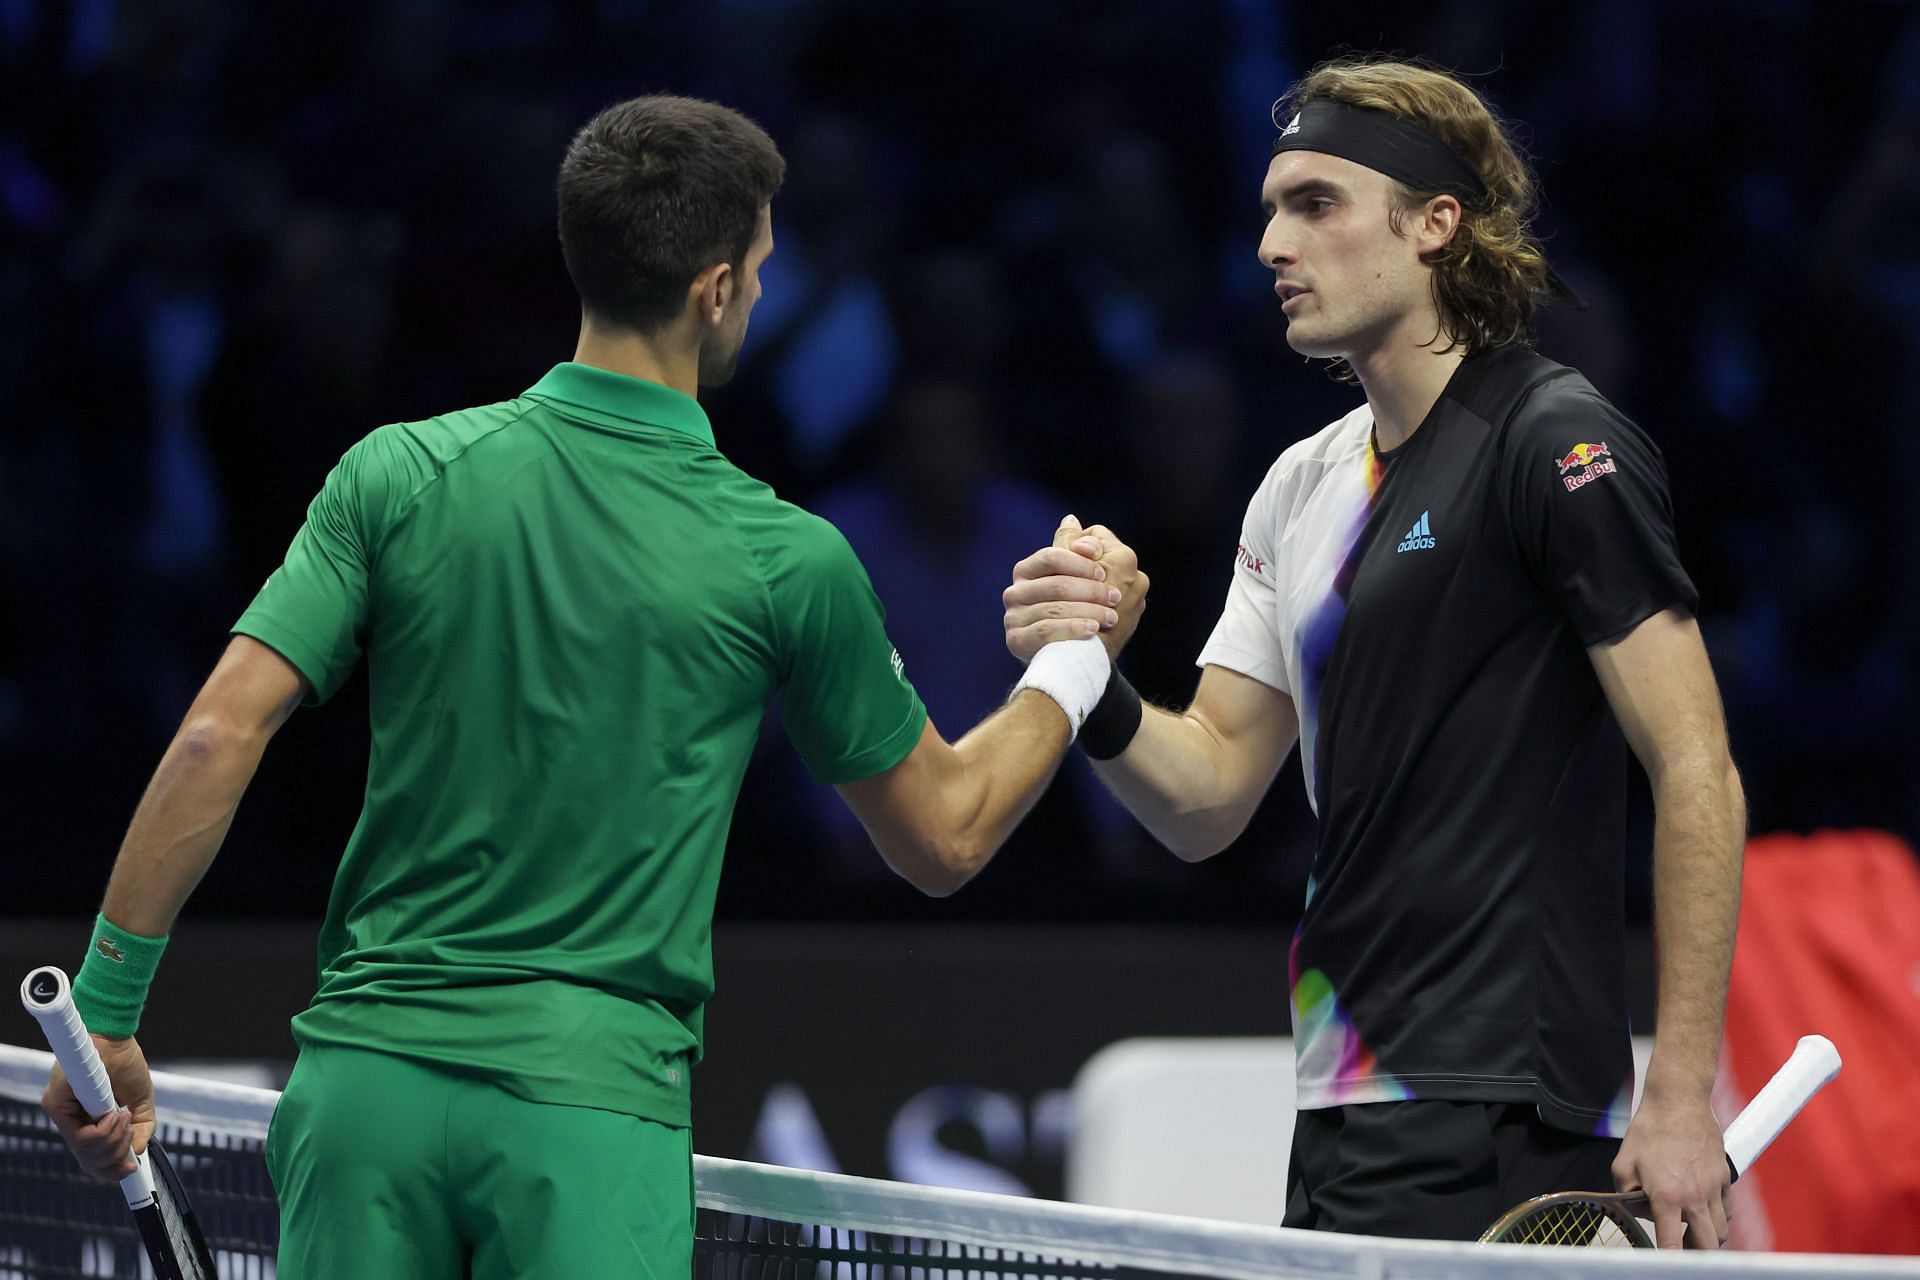 Djokovic (left) or Tsitsipas will replace Carlos Alcaraz (not in pic) as the World No. 1 on Monday.